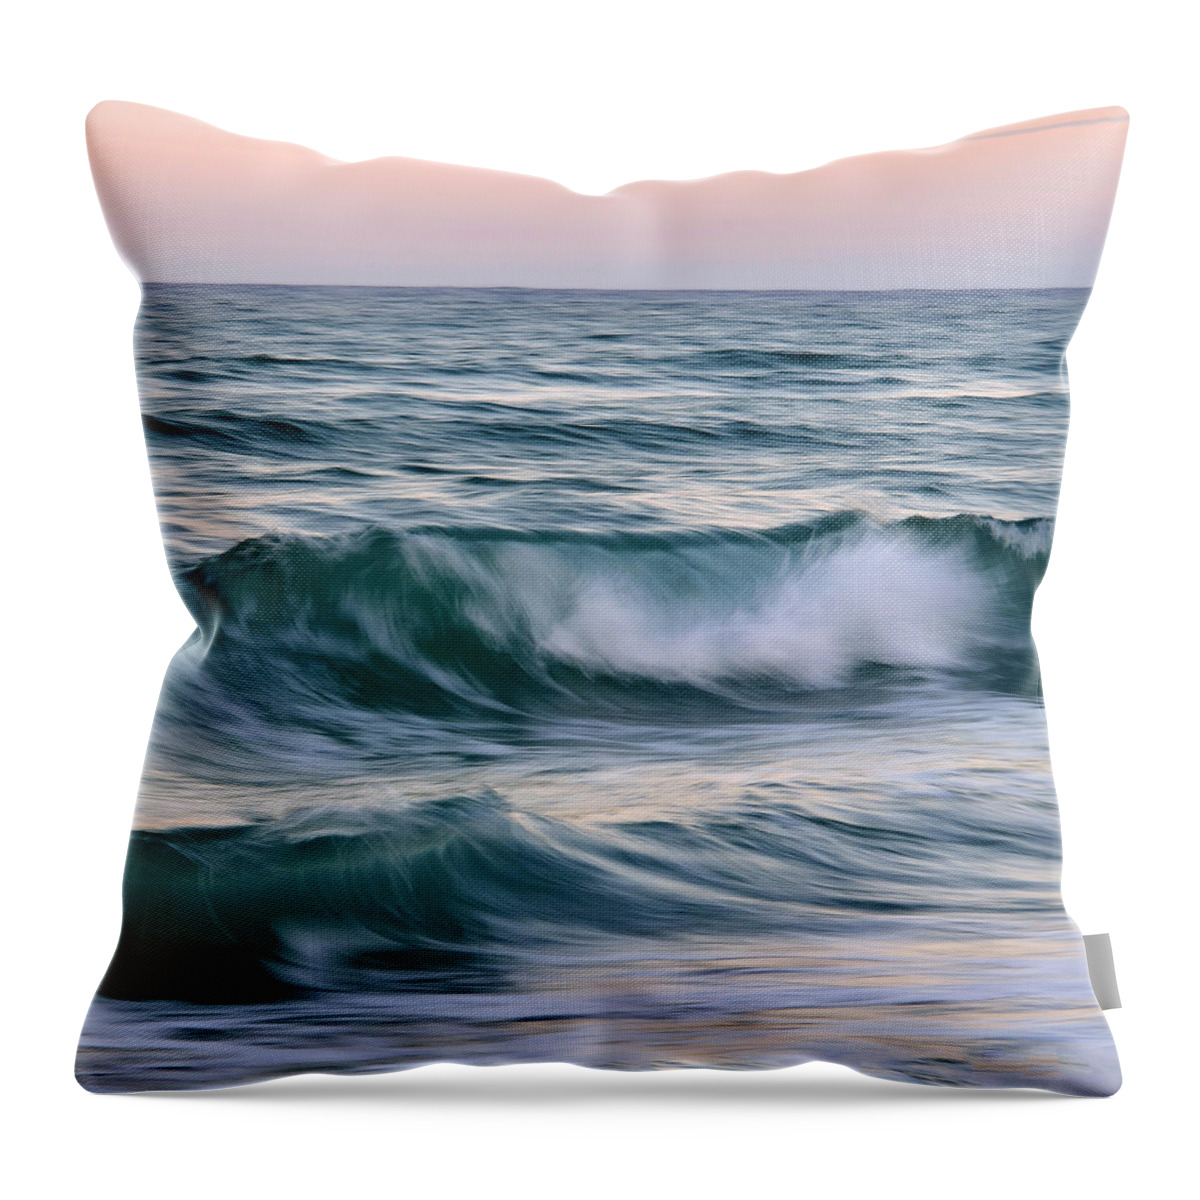 Ocean Throw Pillow featuring the photograph Salt Life Square by Laura Fasulo